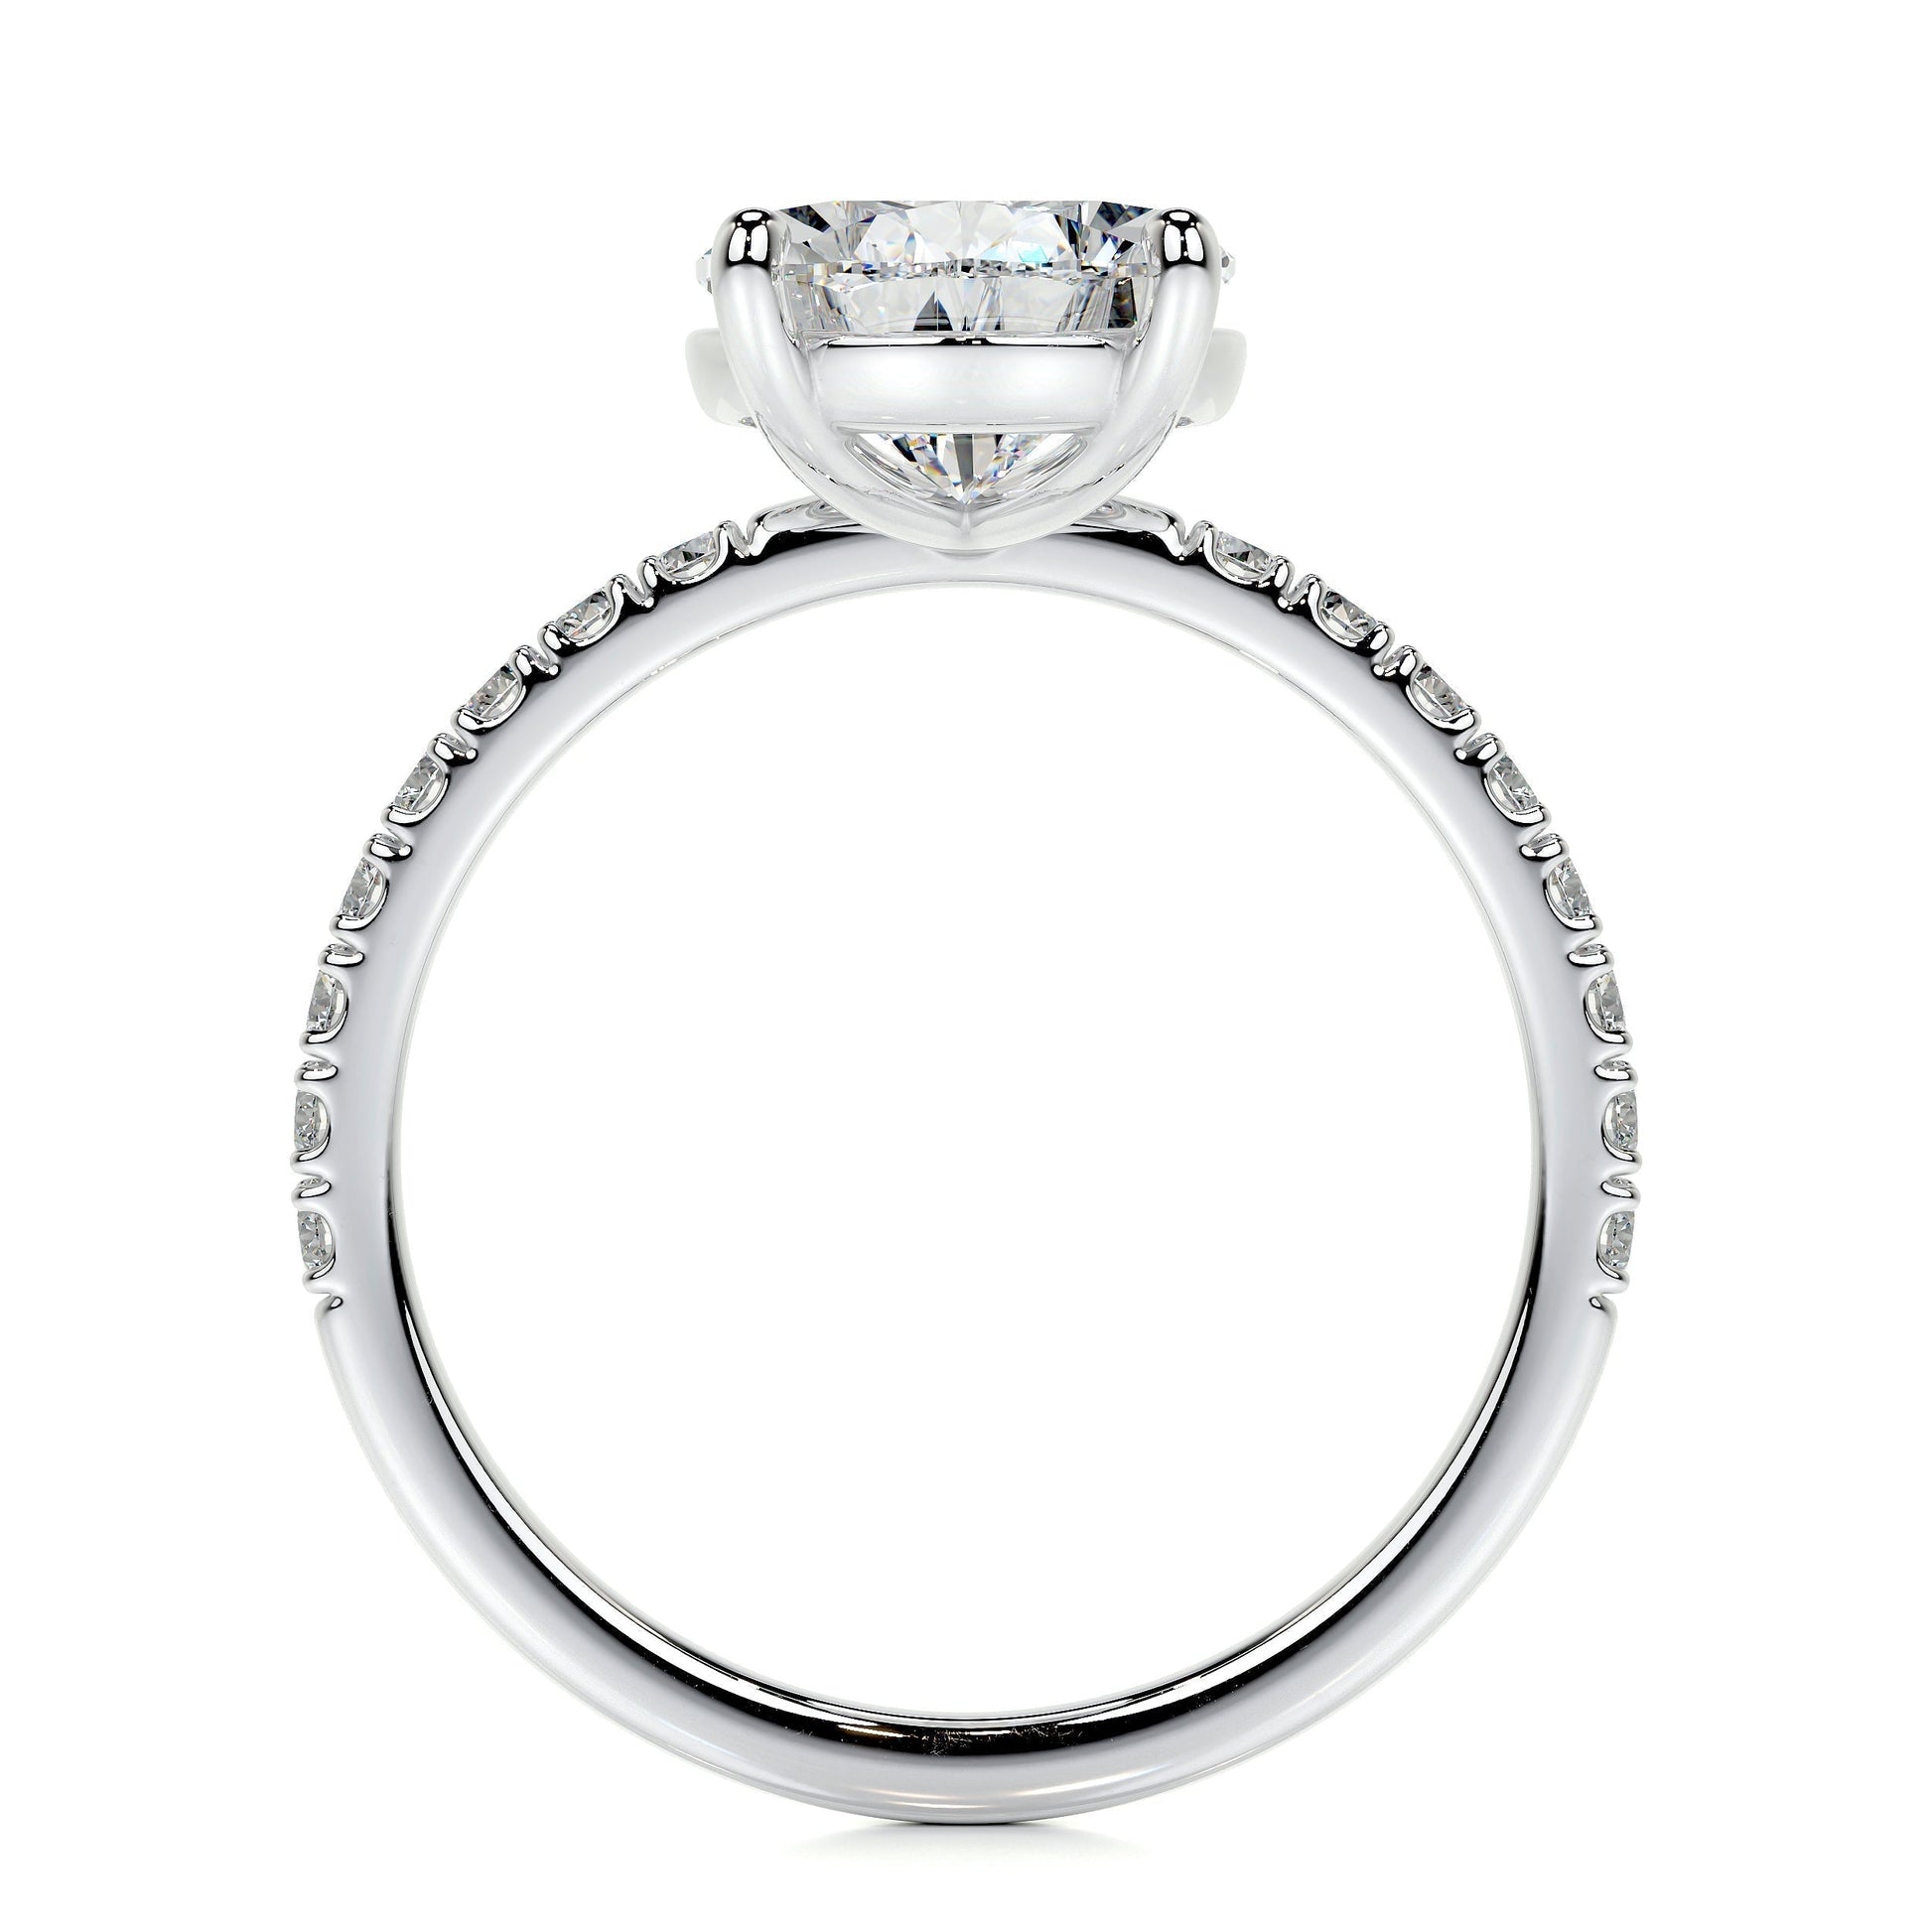 5.0 CT Pear Solitaire CVD F/VS2 Diamond Engagement Ring 7